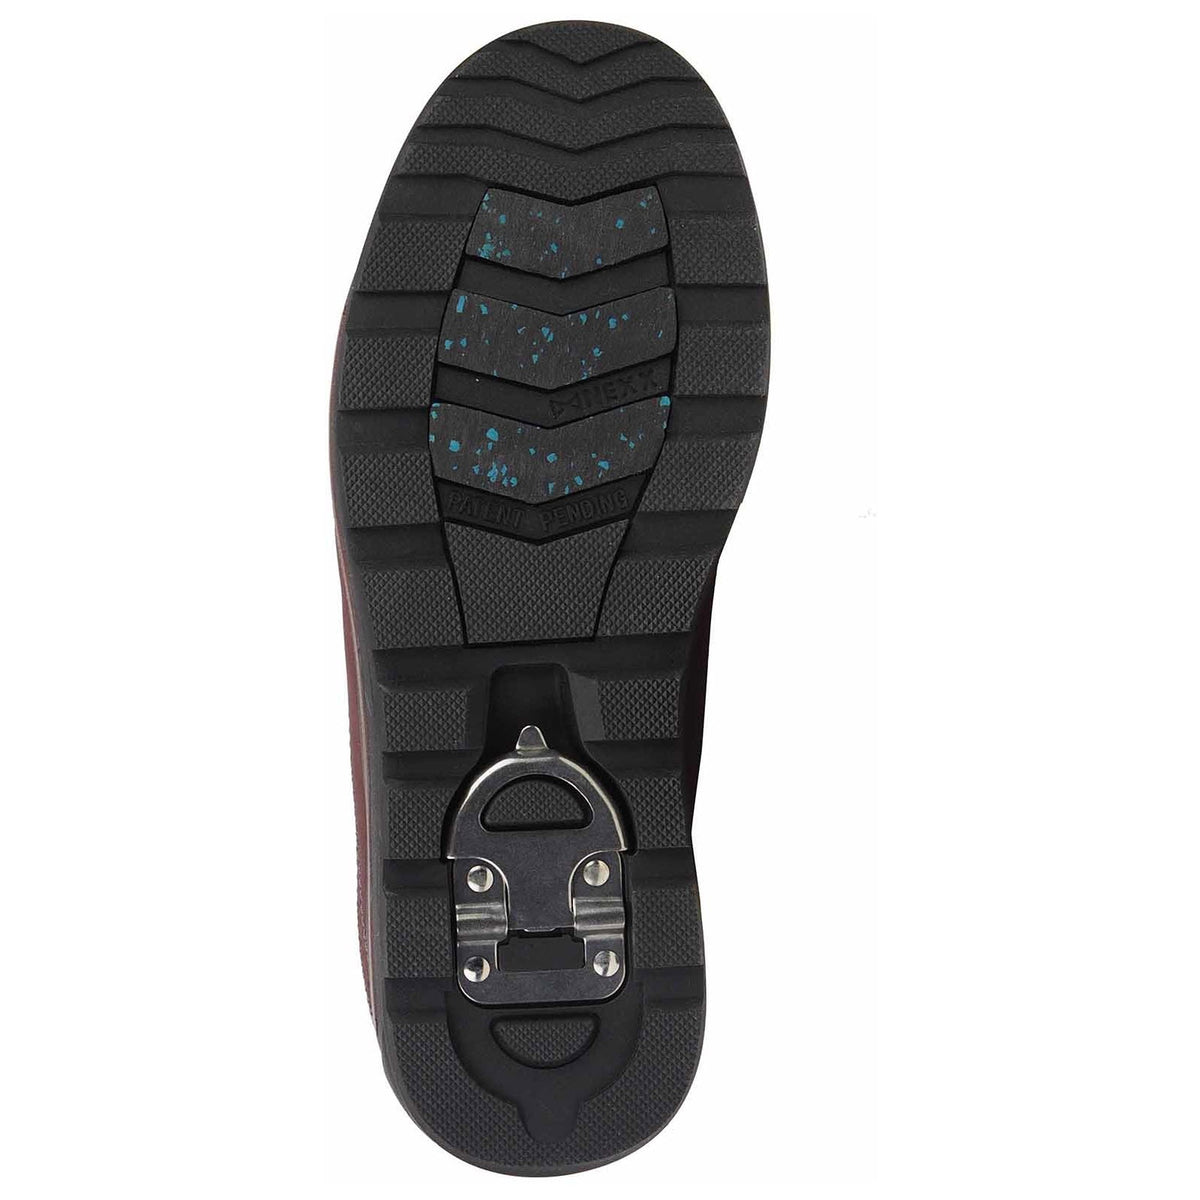 NexGrip black cycling shoe sole with a retractable crampon mechanism and textured tread patterns, incorporating blue and gray accents.